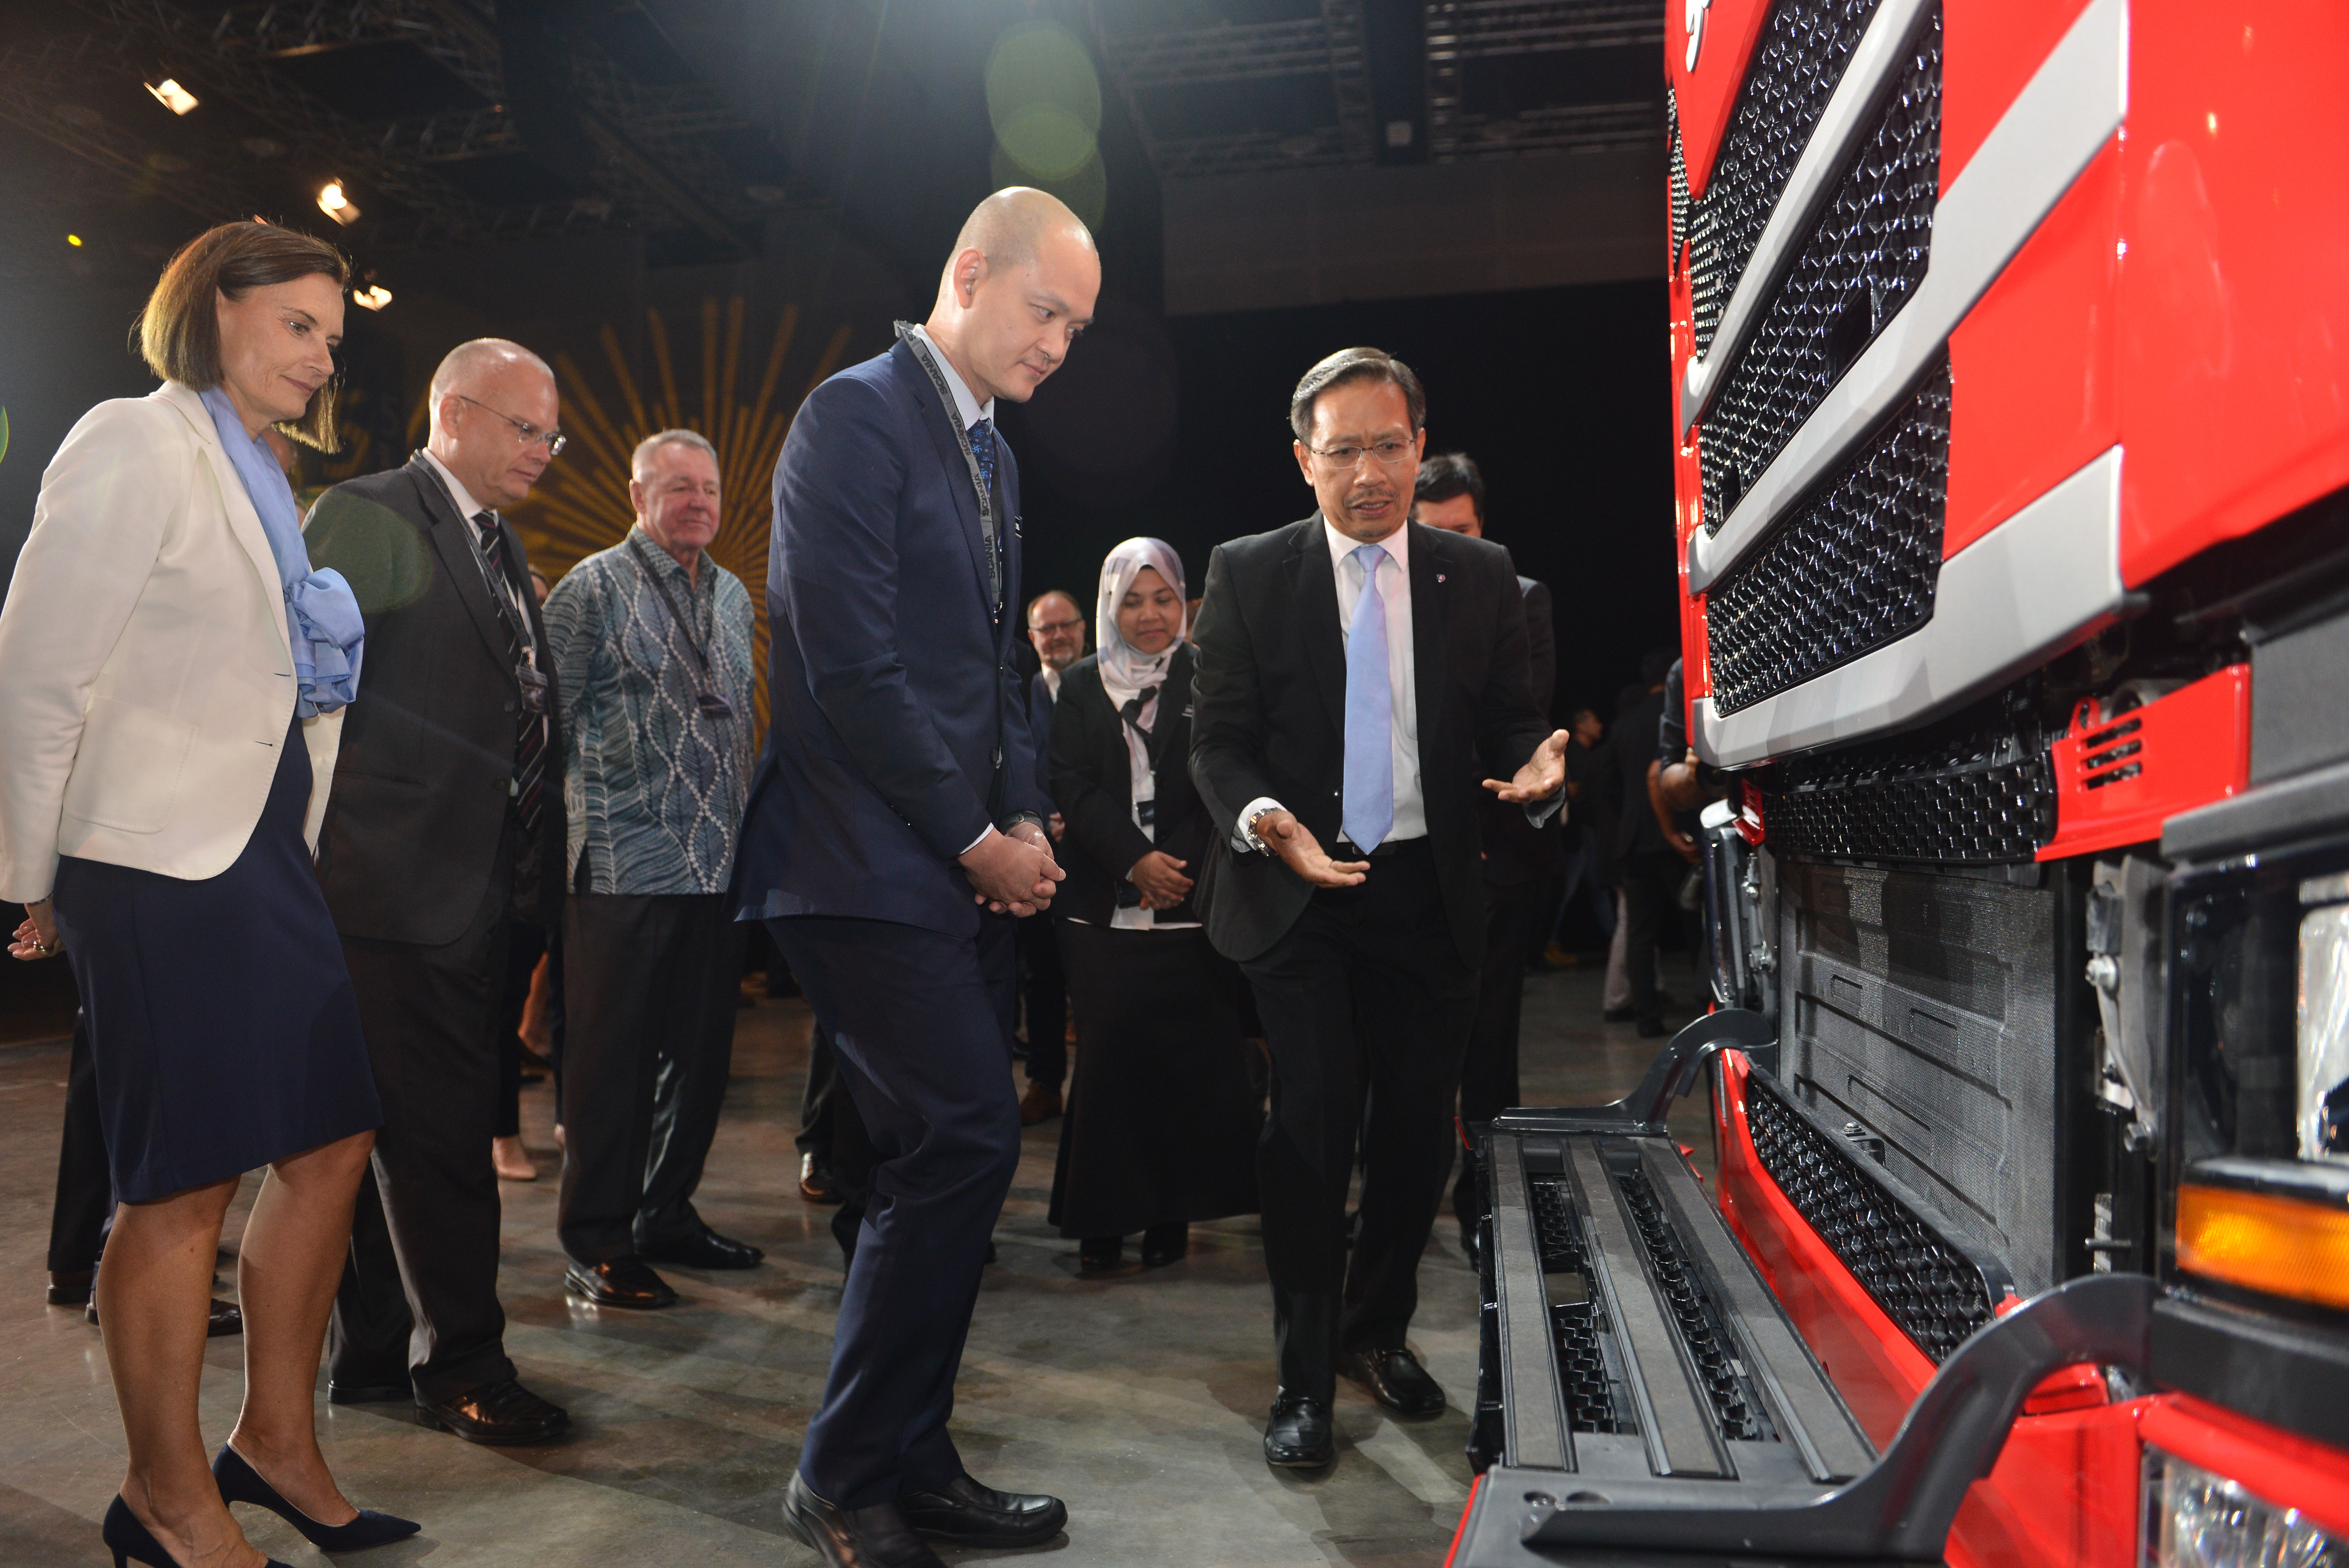 1 Idros Puteh (right) Highlighting One Of The New Generation Trucks To Yb Dr. Ong Kian Ming At The Recent Launch Event